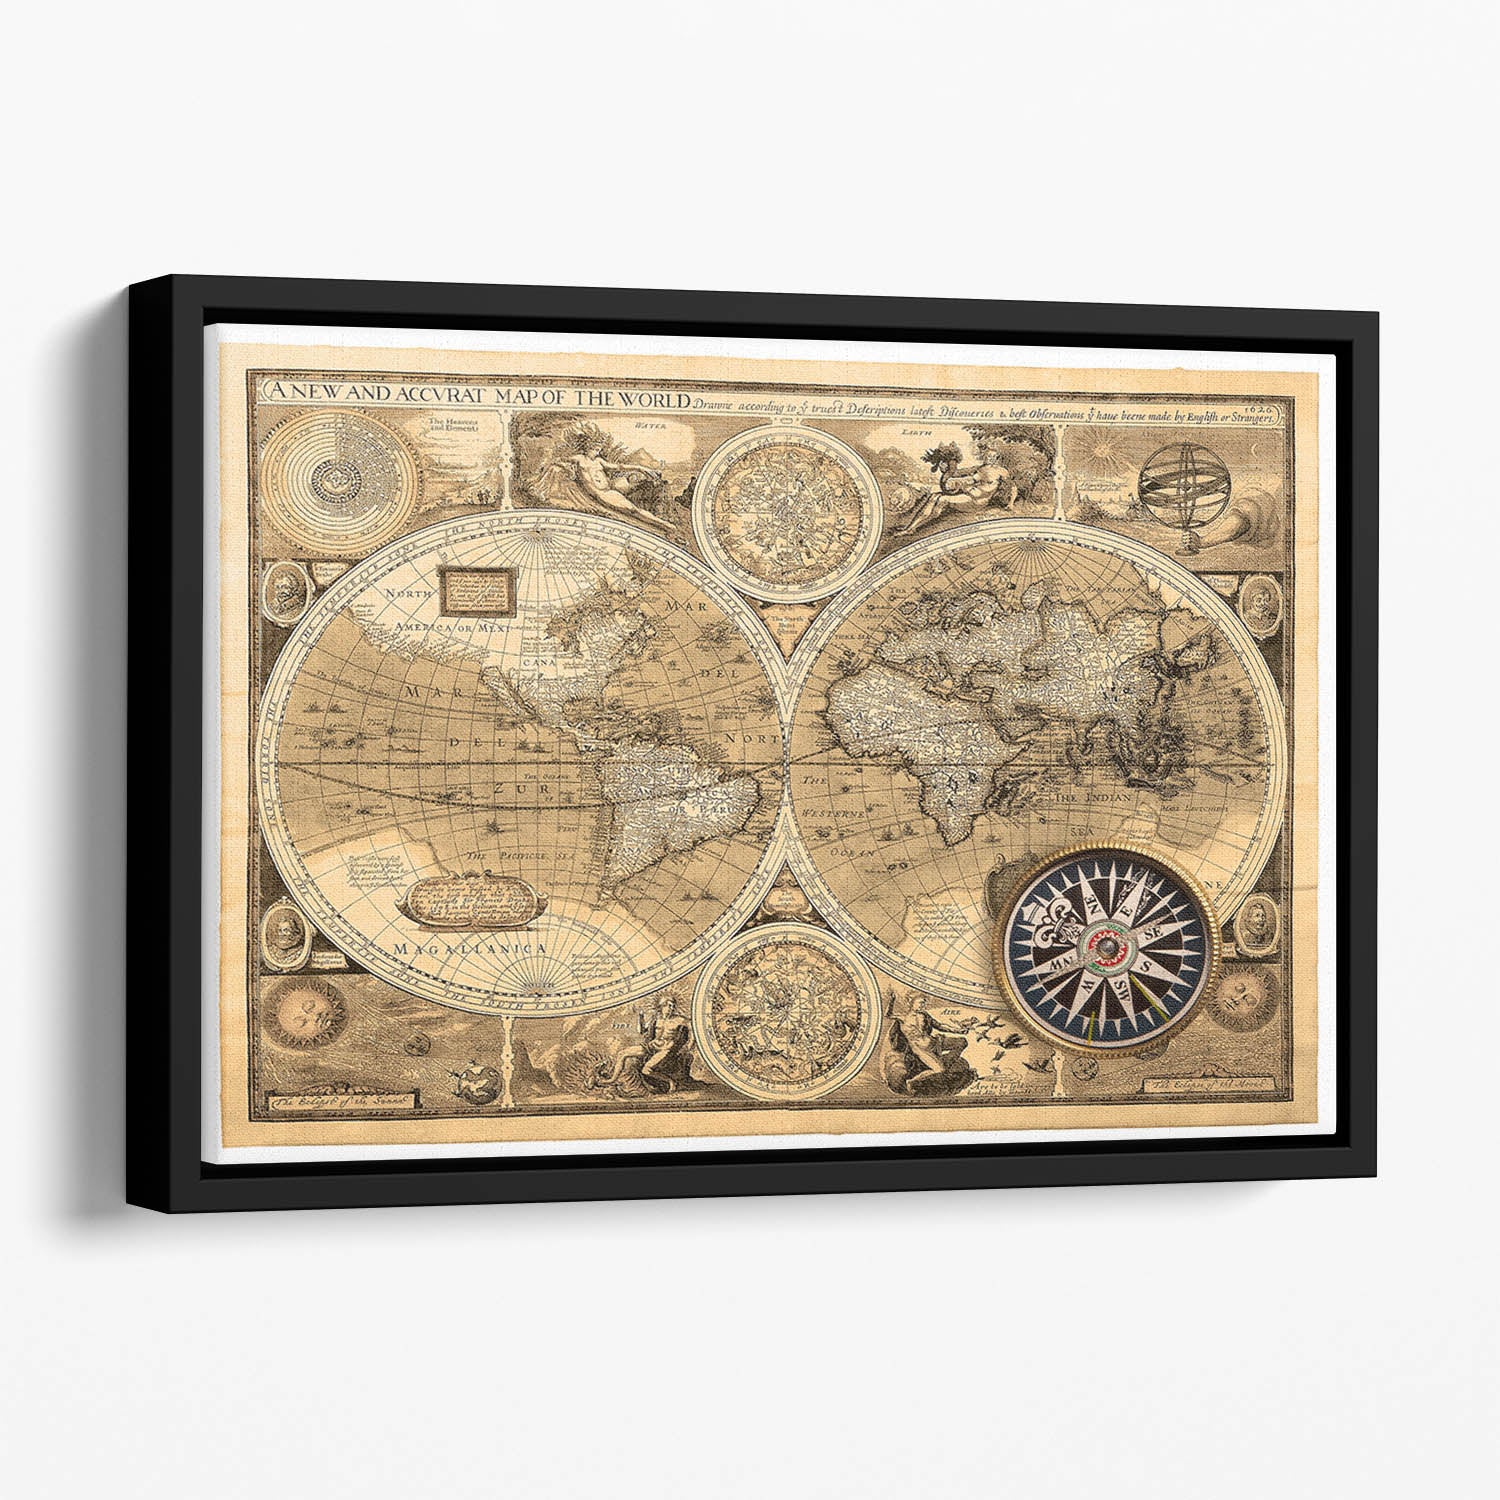 A new and accvrat map of the world Floating Framed Canvas